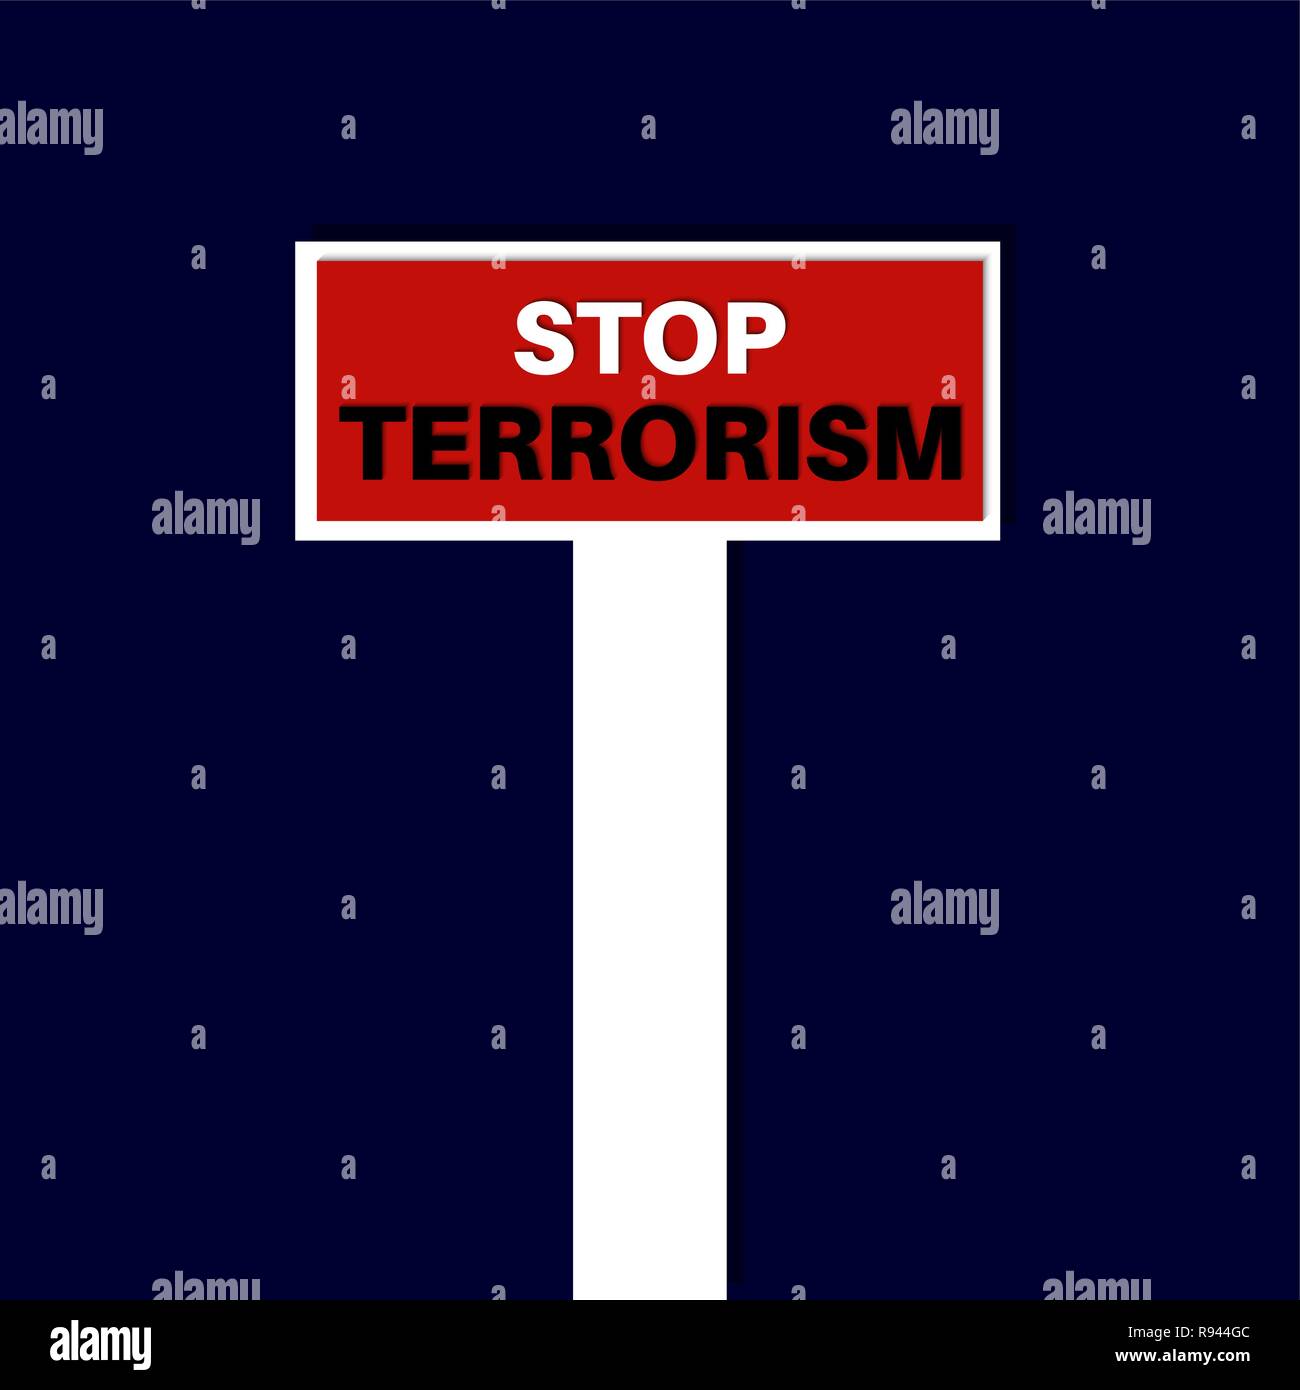 Stop terrorism. Vector illustration. Symbolizes a protest against extremism, acts of terrorism. The way conducts in an impasse. Stock Vector